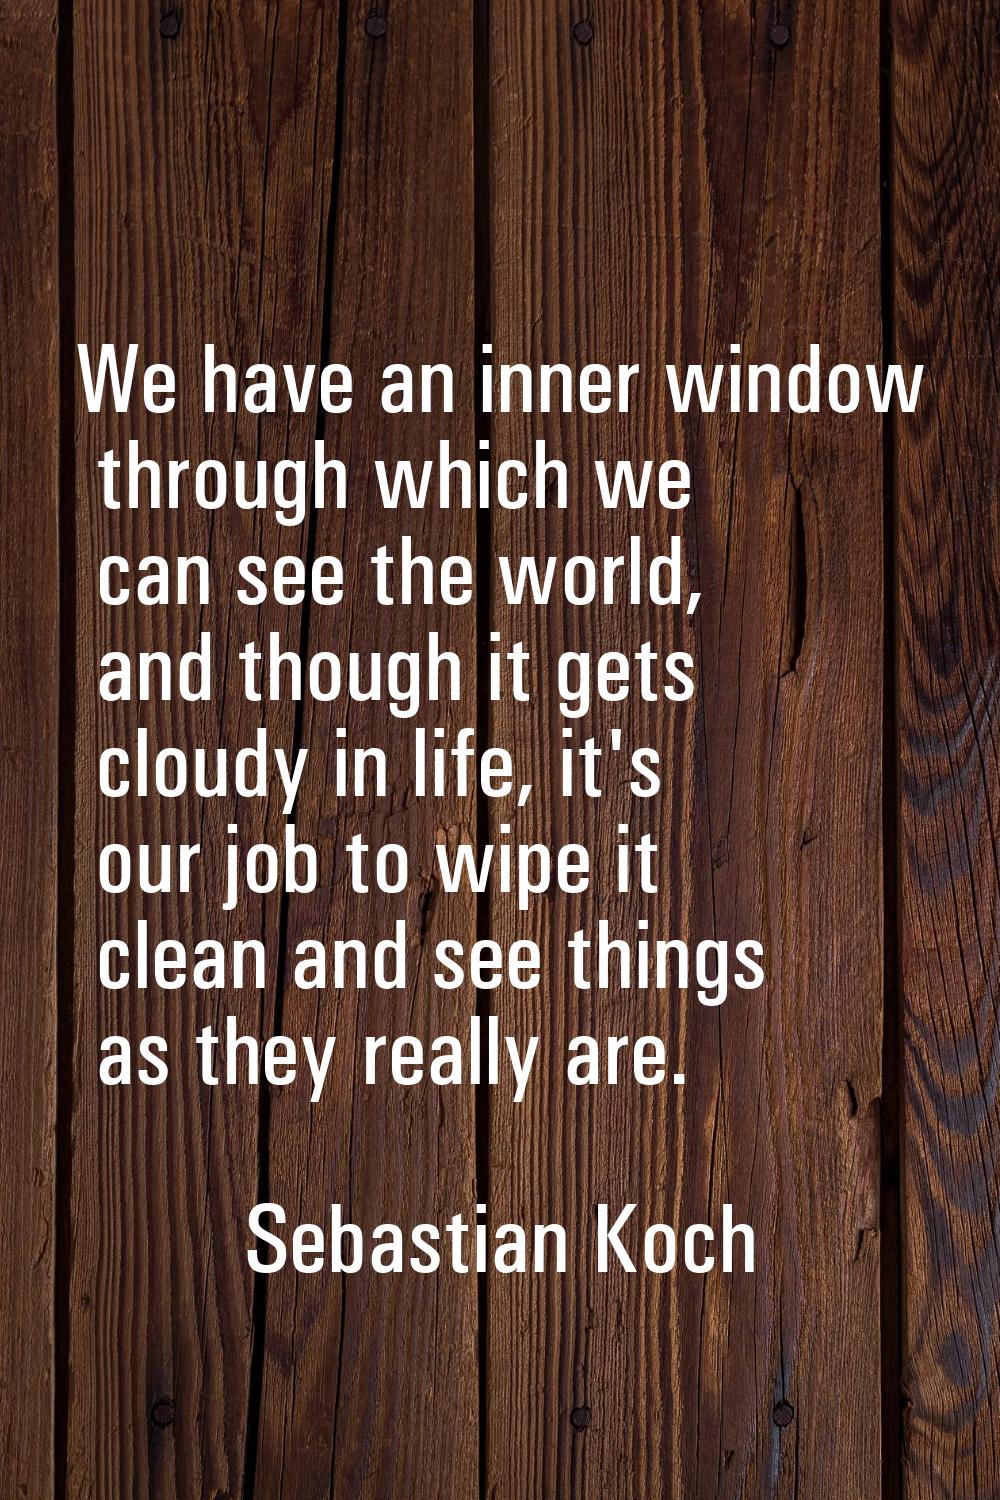 We have an inner window through which we can see the world, and though it gets cloudy in life, it's